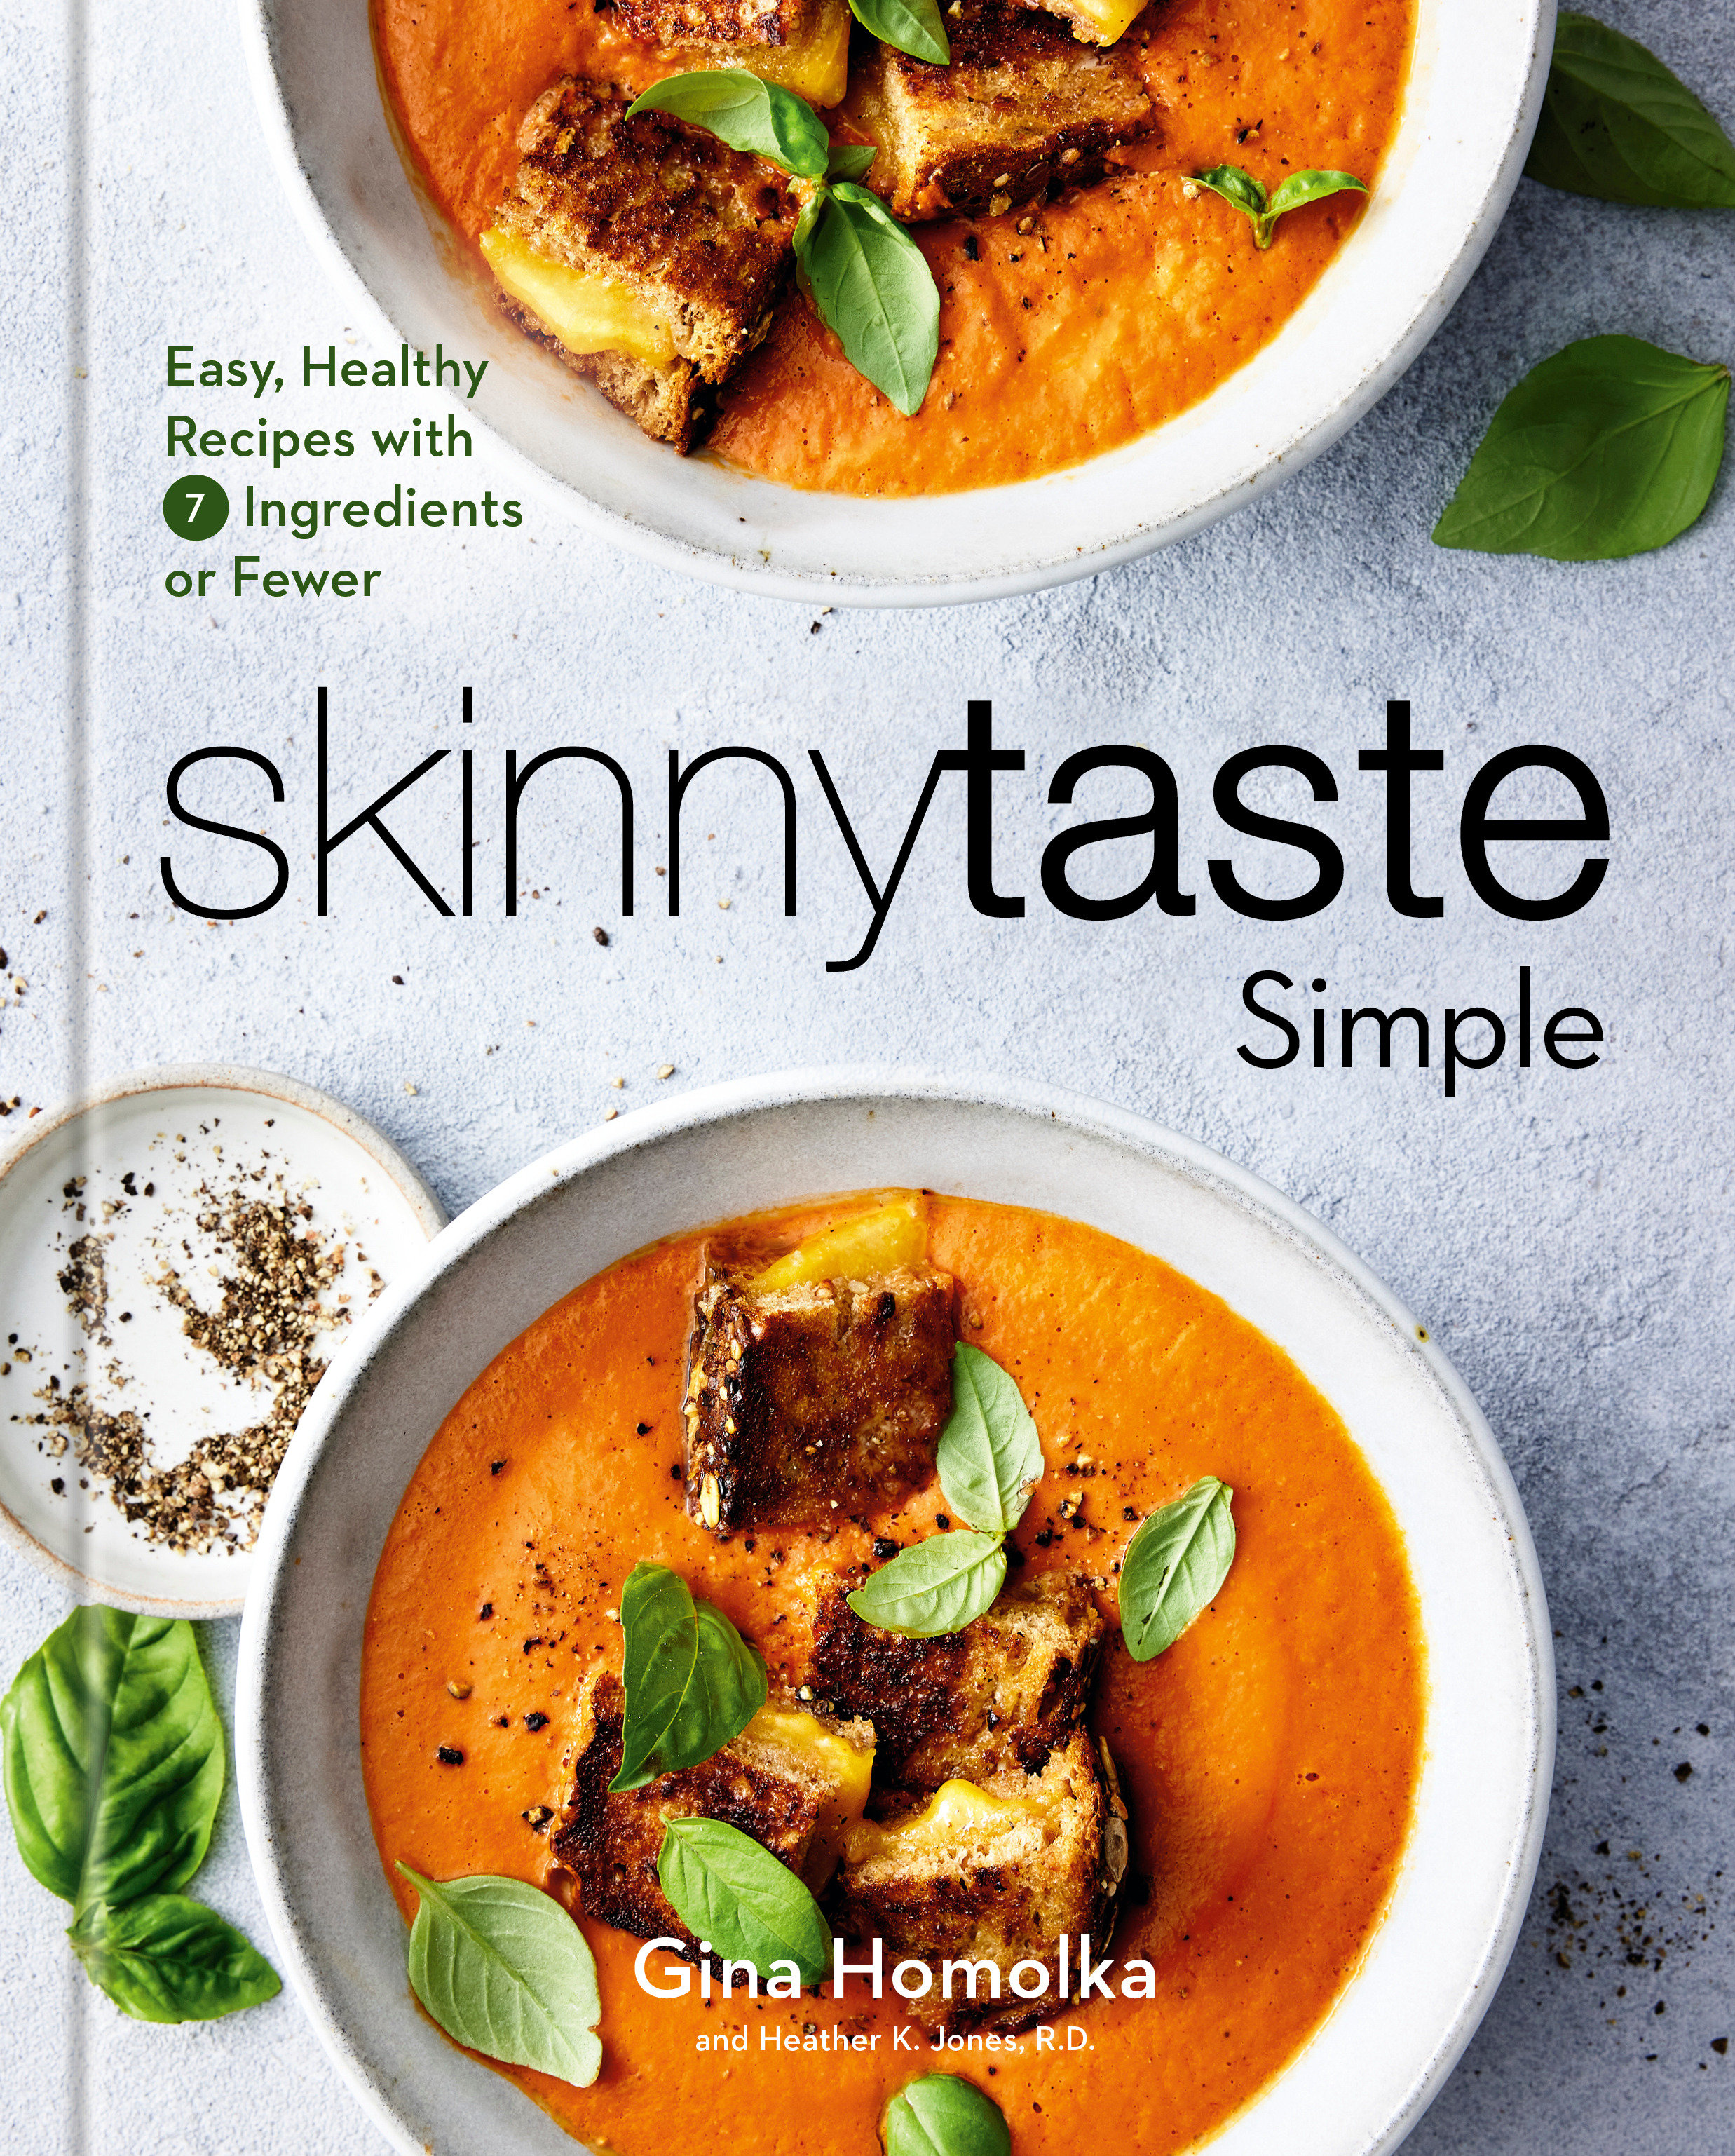 Skinnytaste Simple Easy, Healthy Recipes with 7 Ingredients or Fewer: A Cookbook cover image